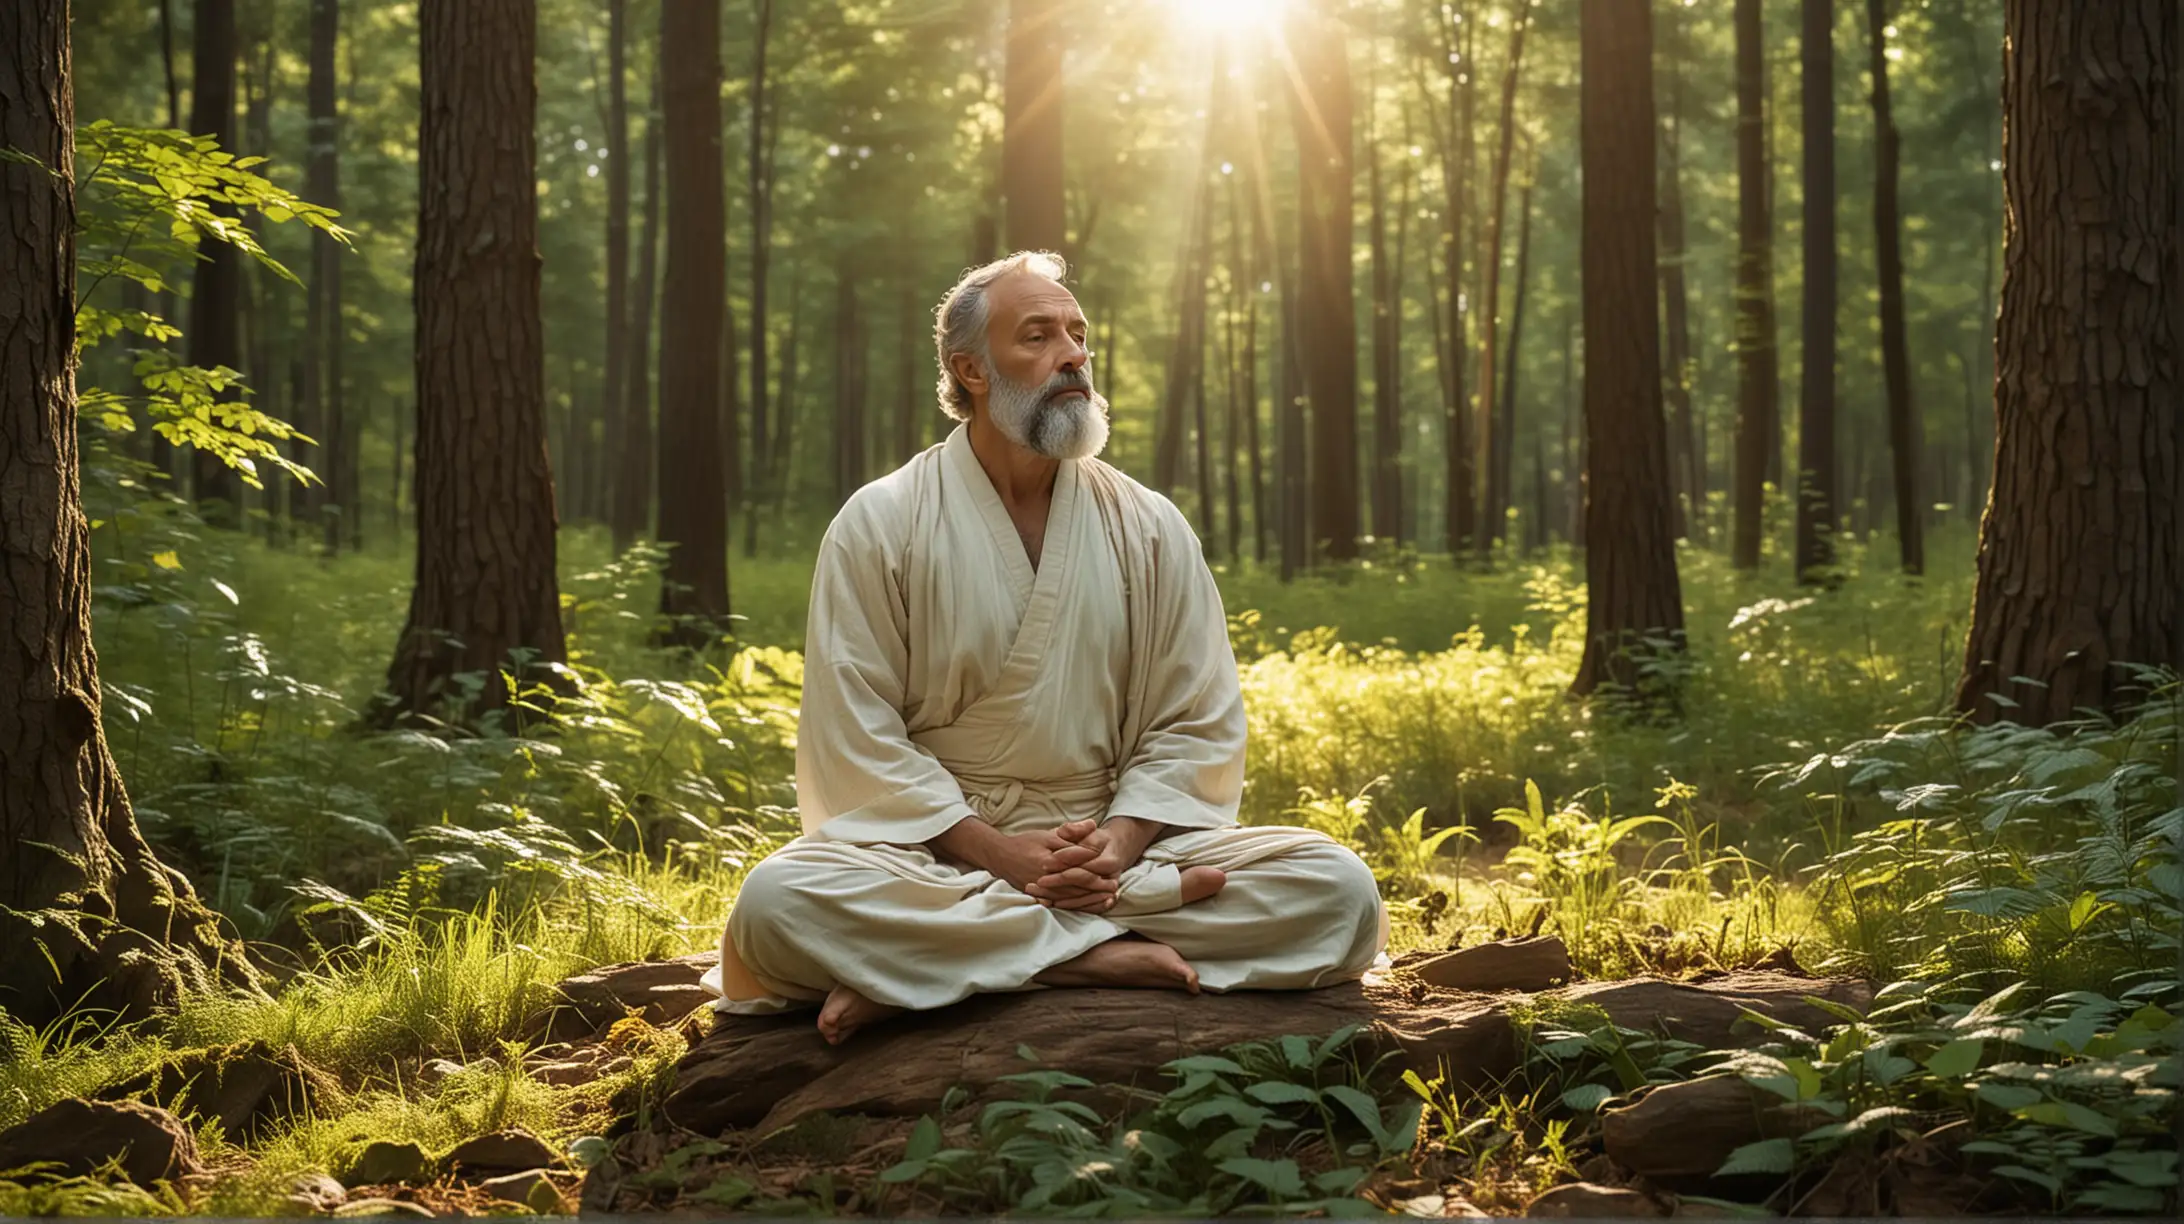 Tranquil Forest Meditation Stoic Philosopher Finding Inner Peace